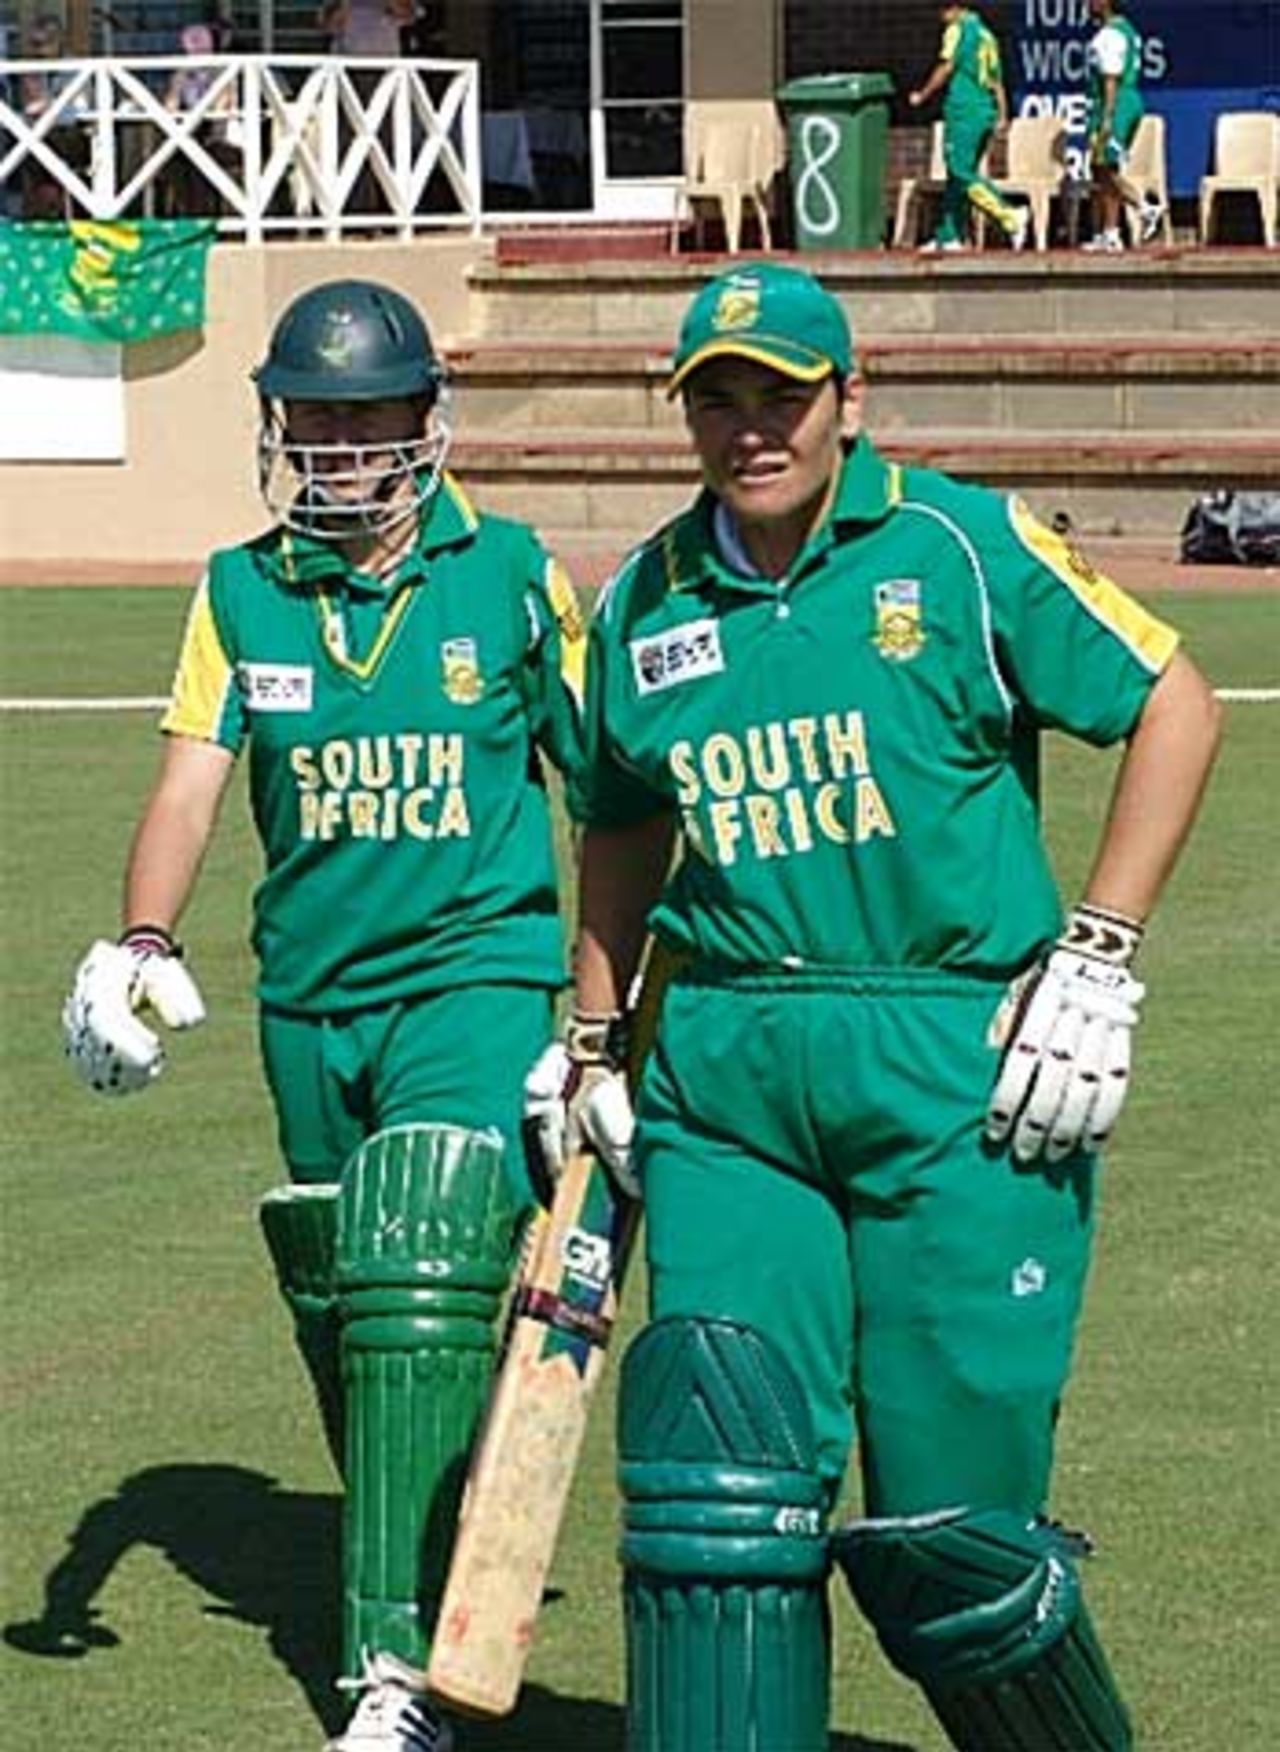 Daleen Terblanche and Cri-Zelda Brits stride out to bat, South Africa v India, World Cup, March 27, 2005